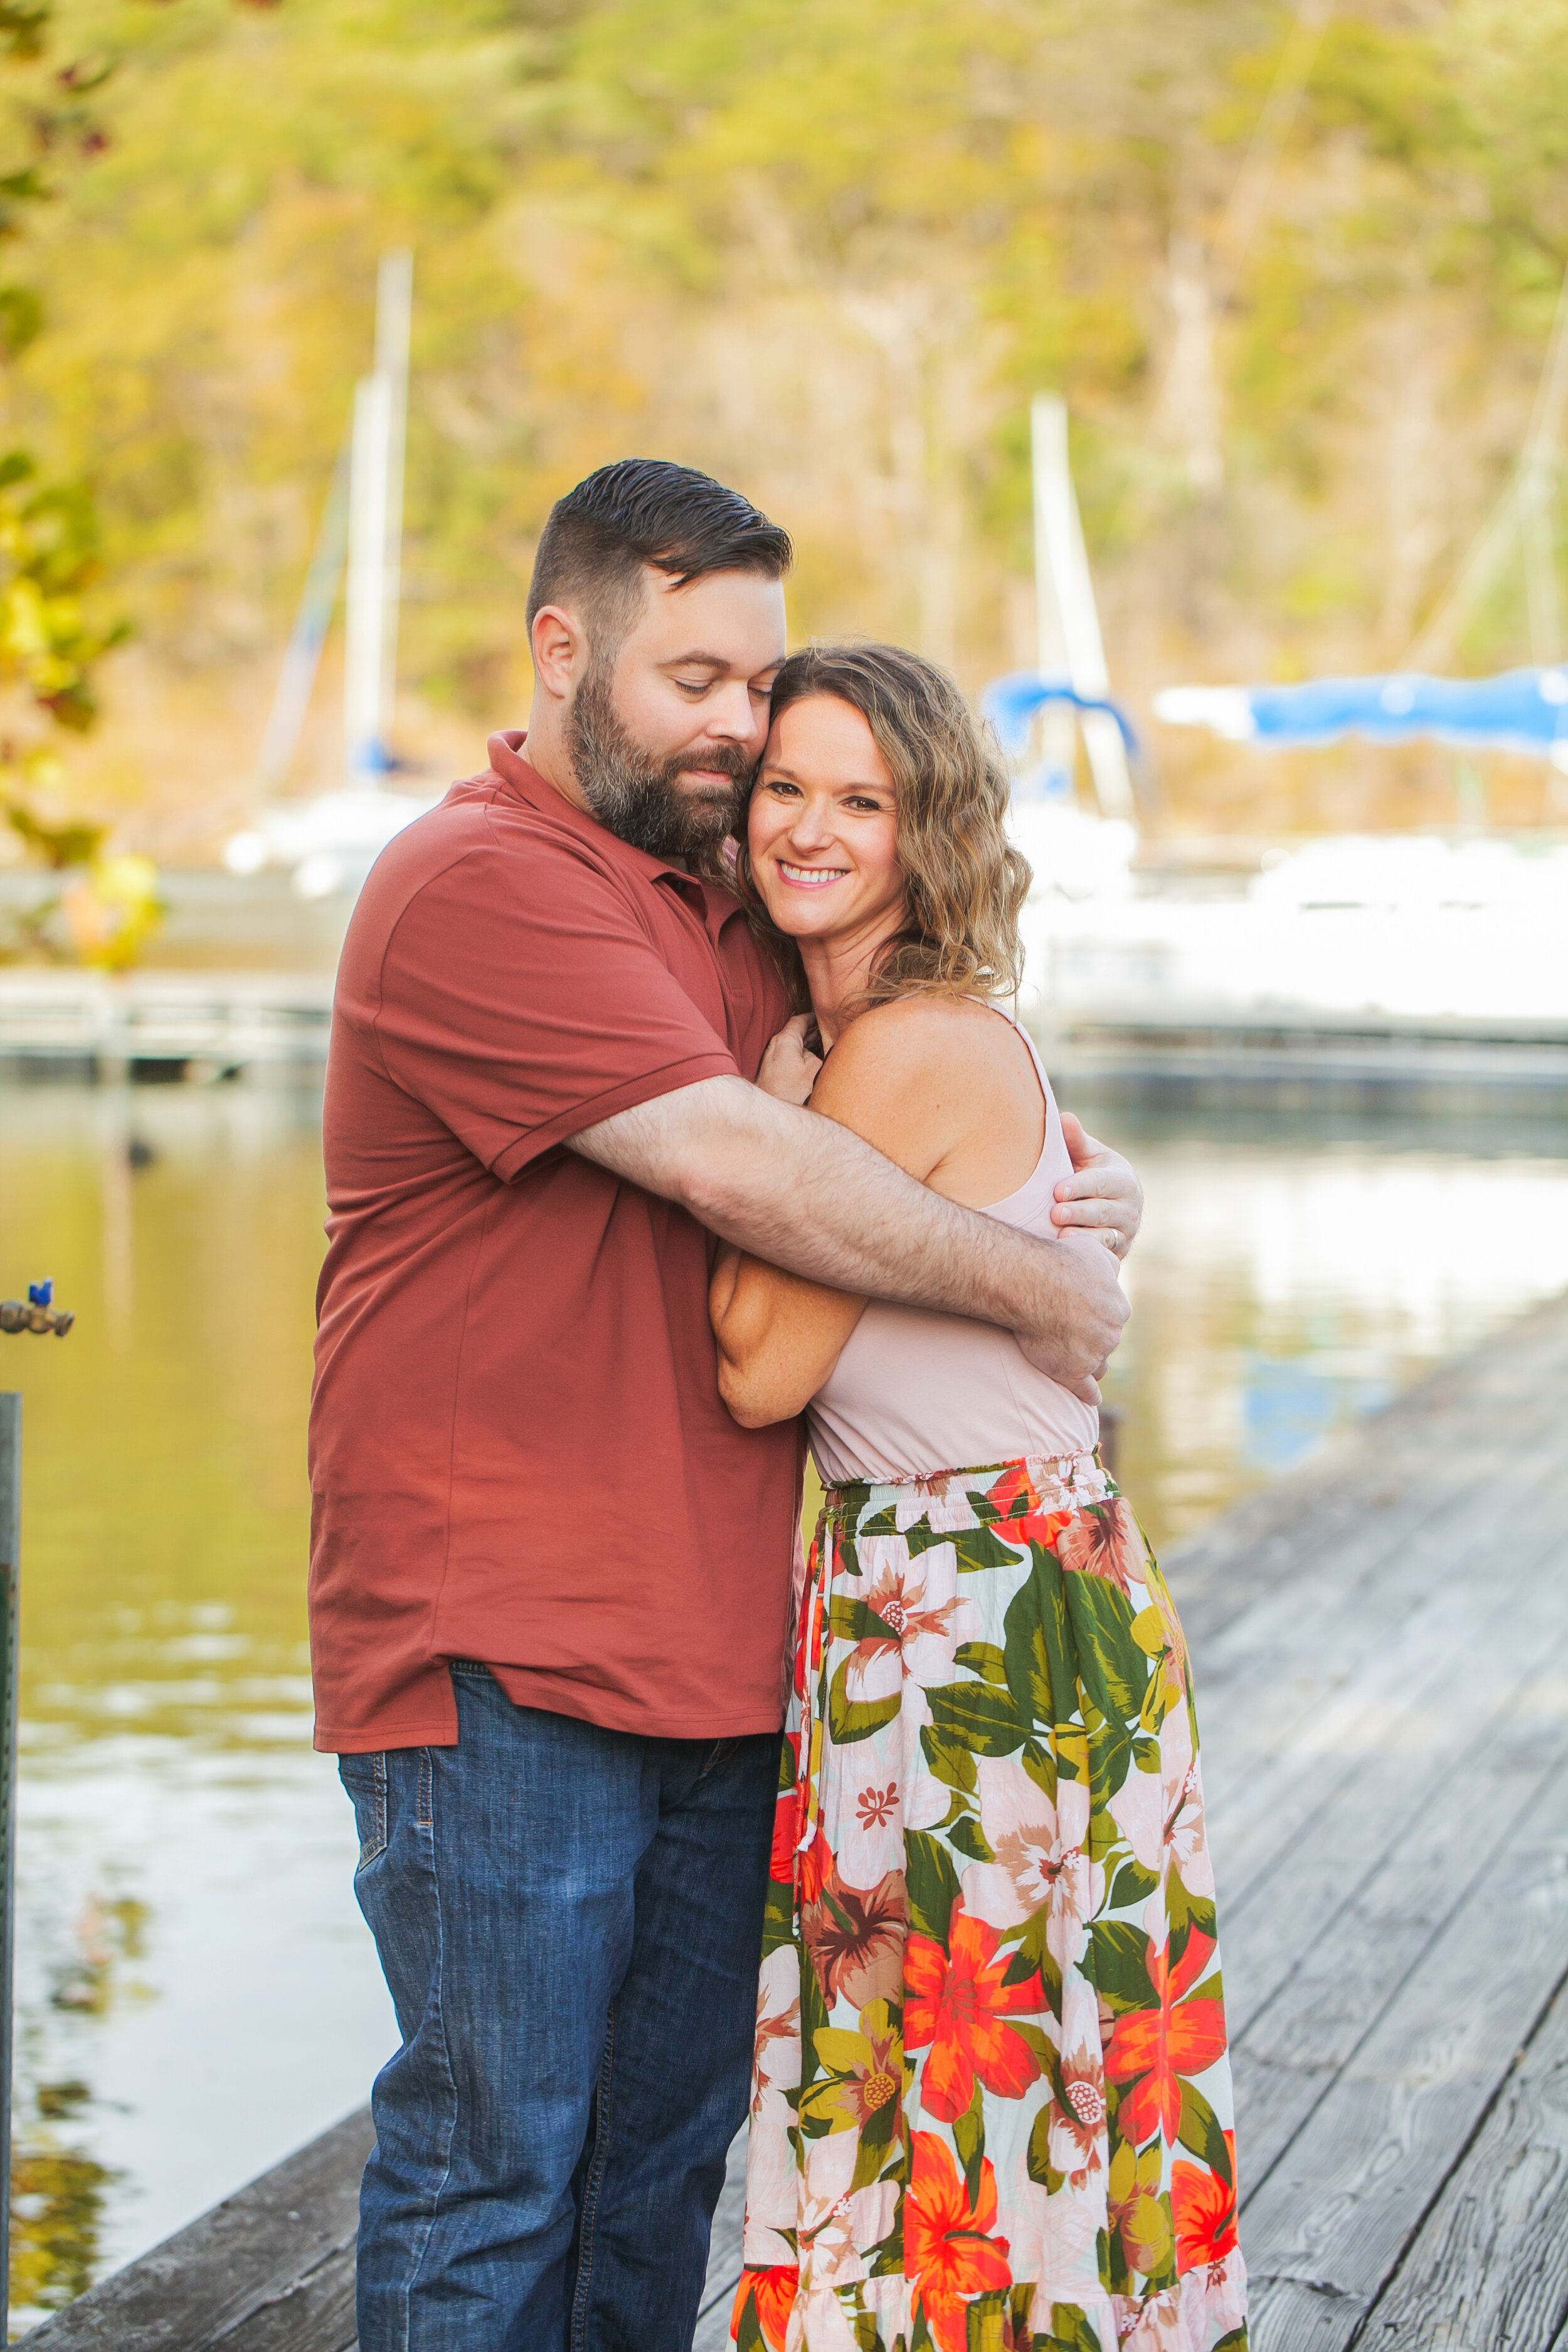 couples-portrait-loving-mom-dad-dock-lake-family-photo-session-fort-worth-tx